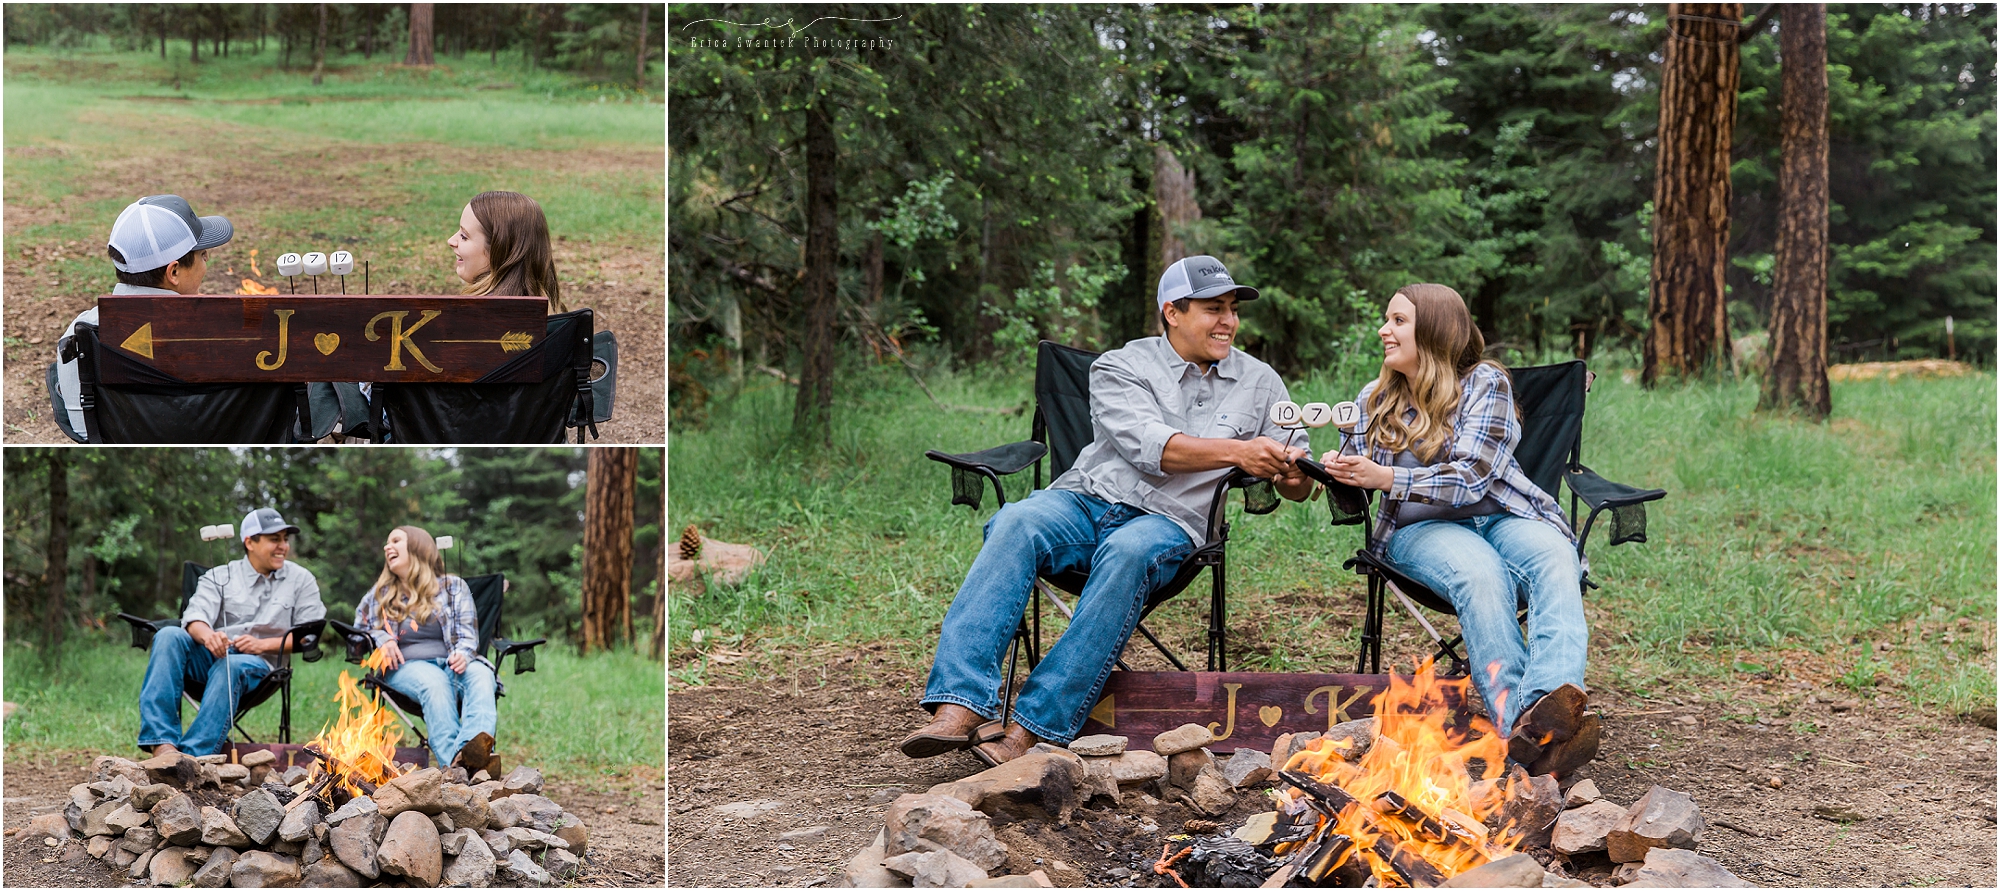 Marshmallows roasted over the campfire with your date written on them make a great engagement photo session prop. | Bend OR wedding photographer Erica Swantek Photography